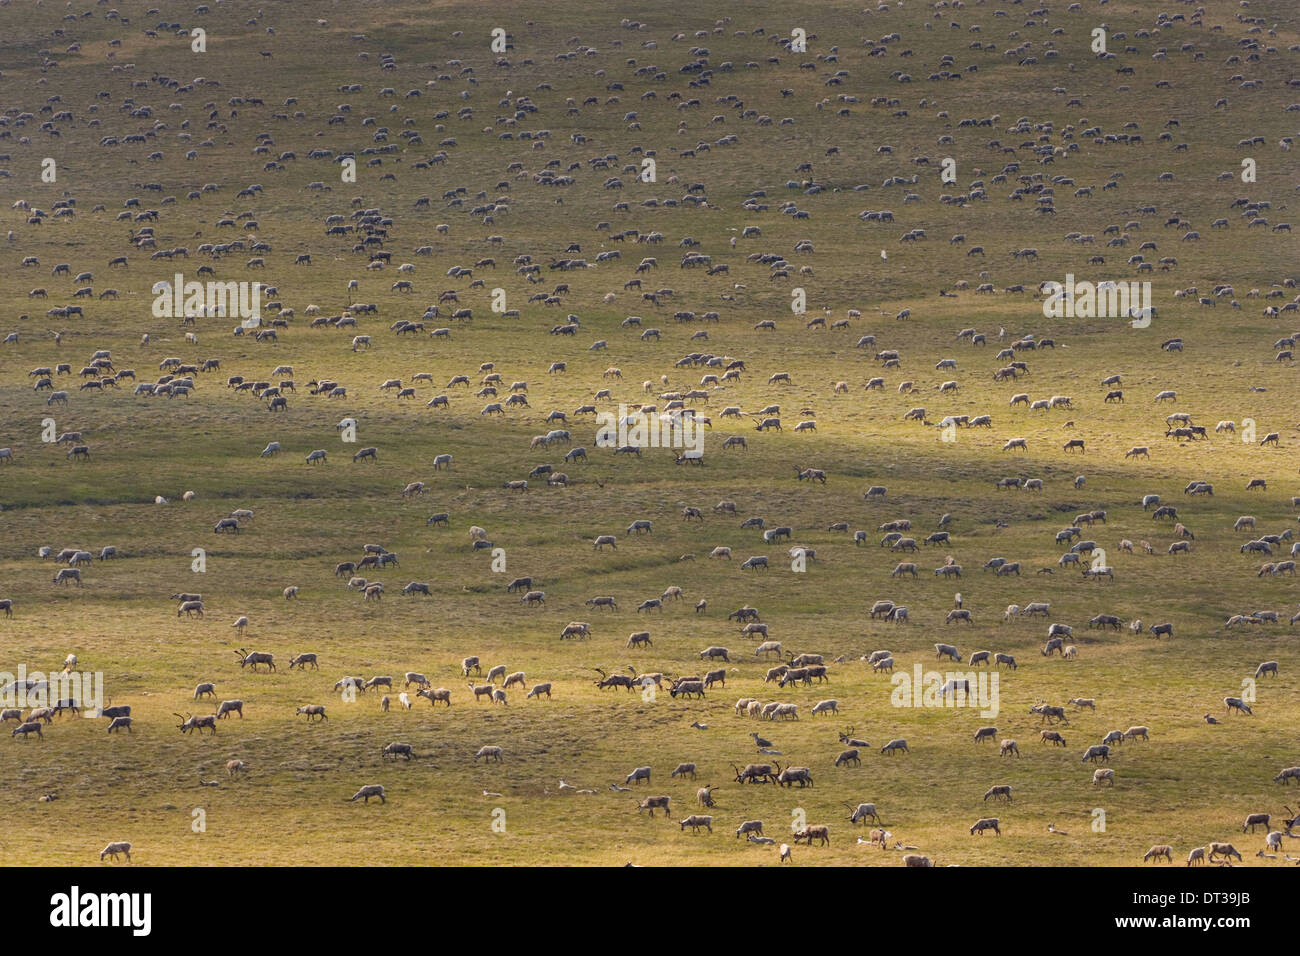 Porcupine caribou animals, a herd of animals migrating across the Arctic Plains in Alaska. Stock Photo